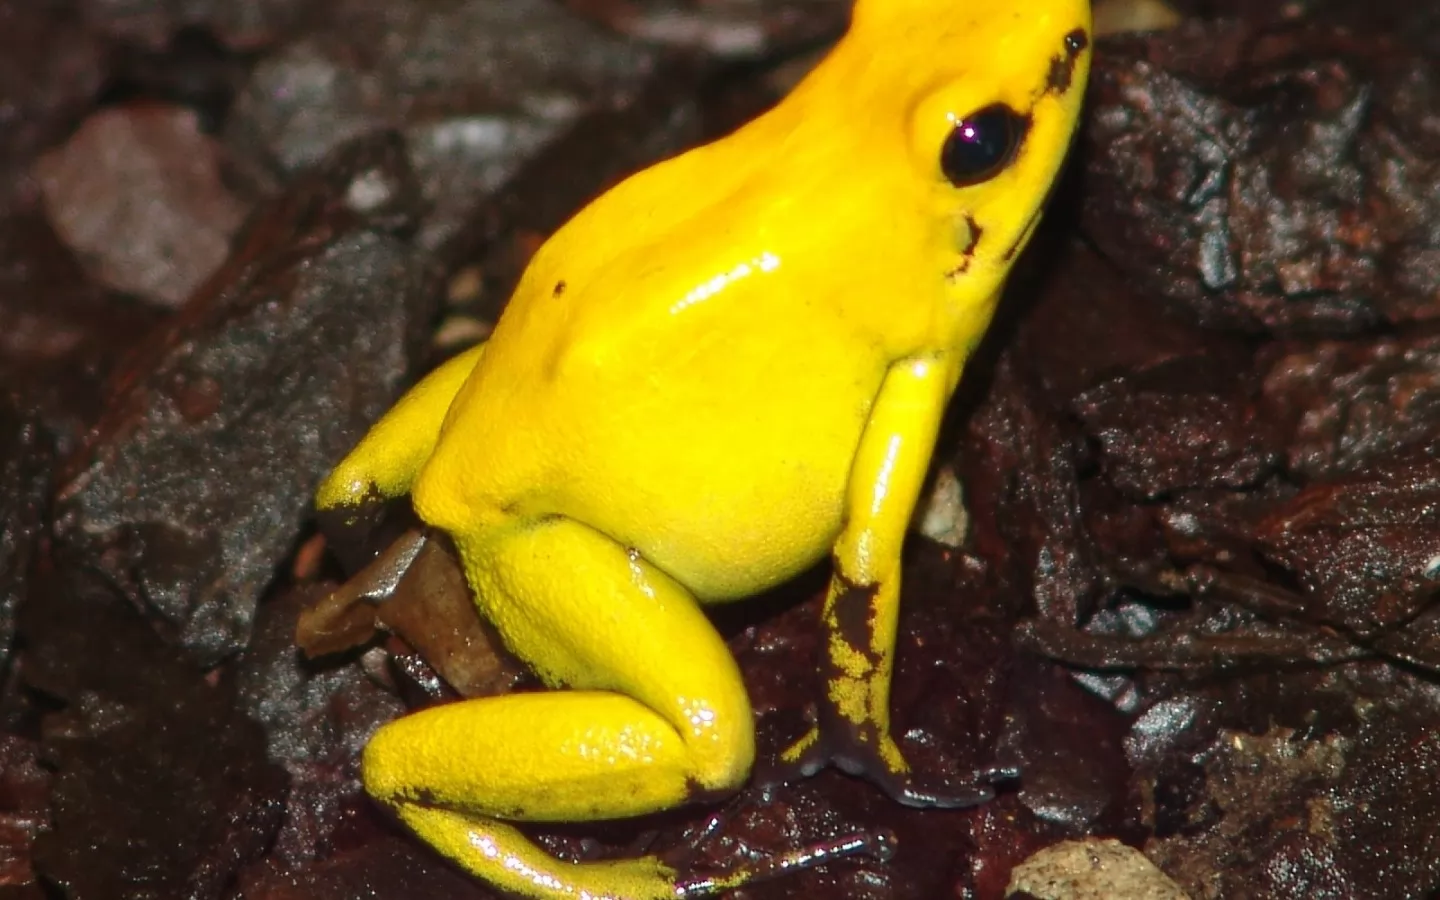 The Yellow frog, amphibious, animals, frogs, golden, yellow x